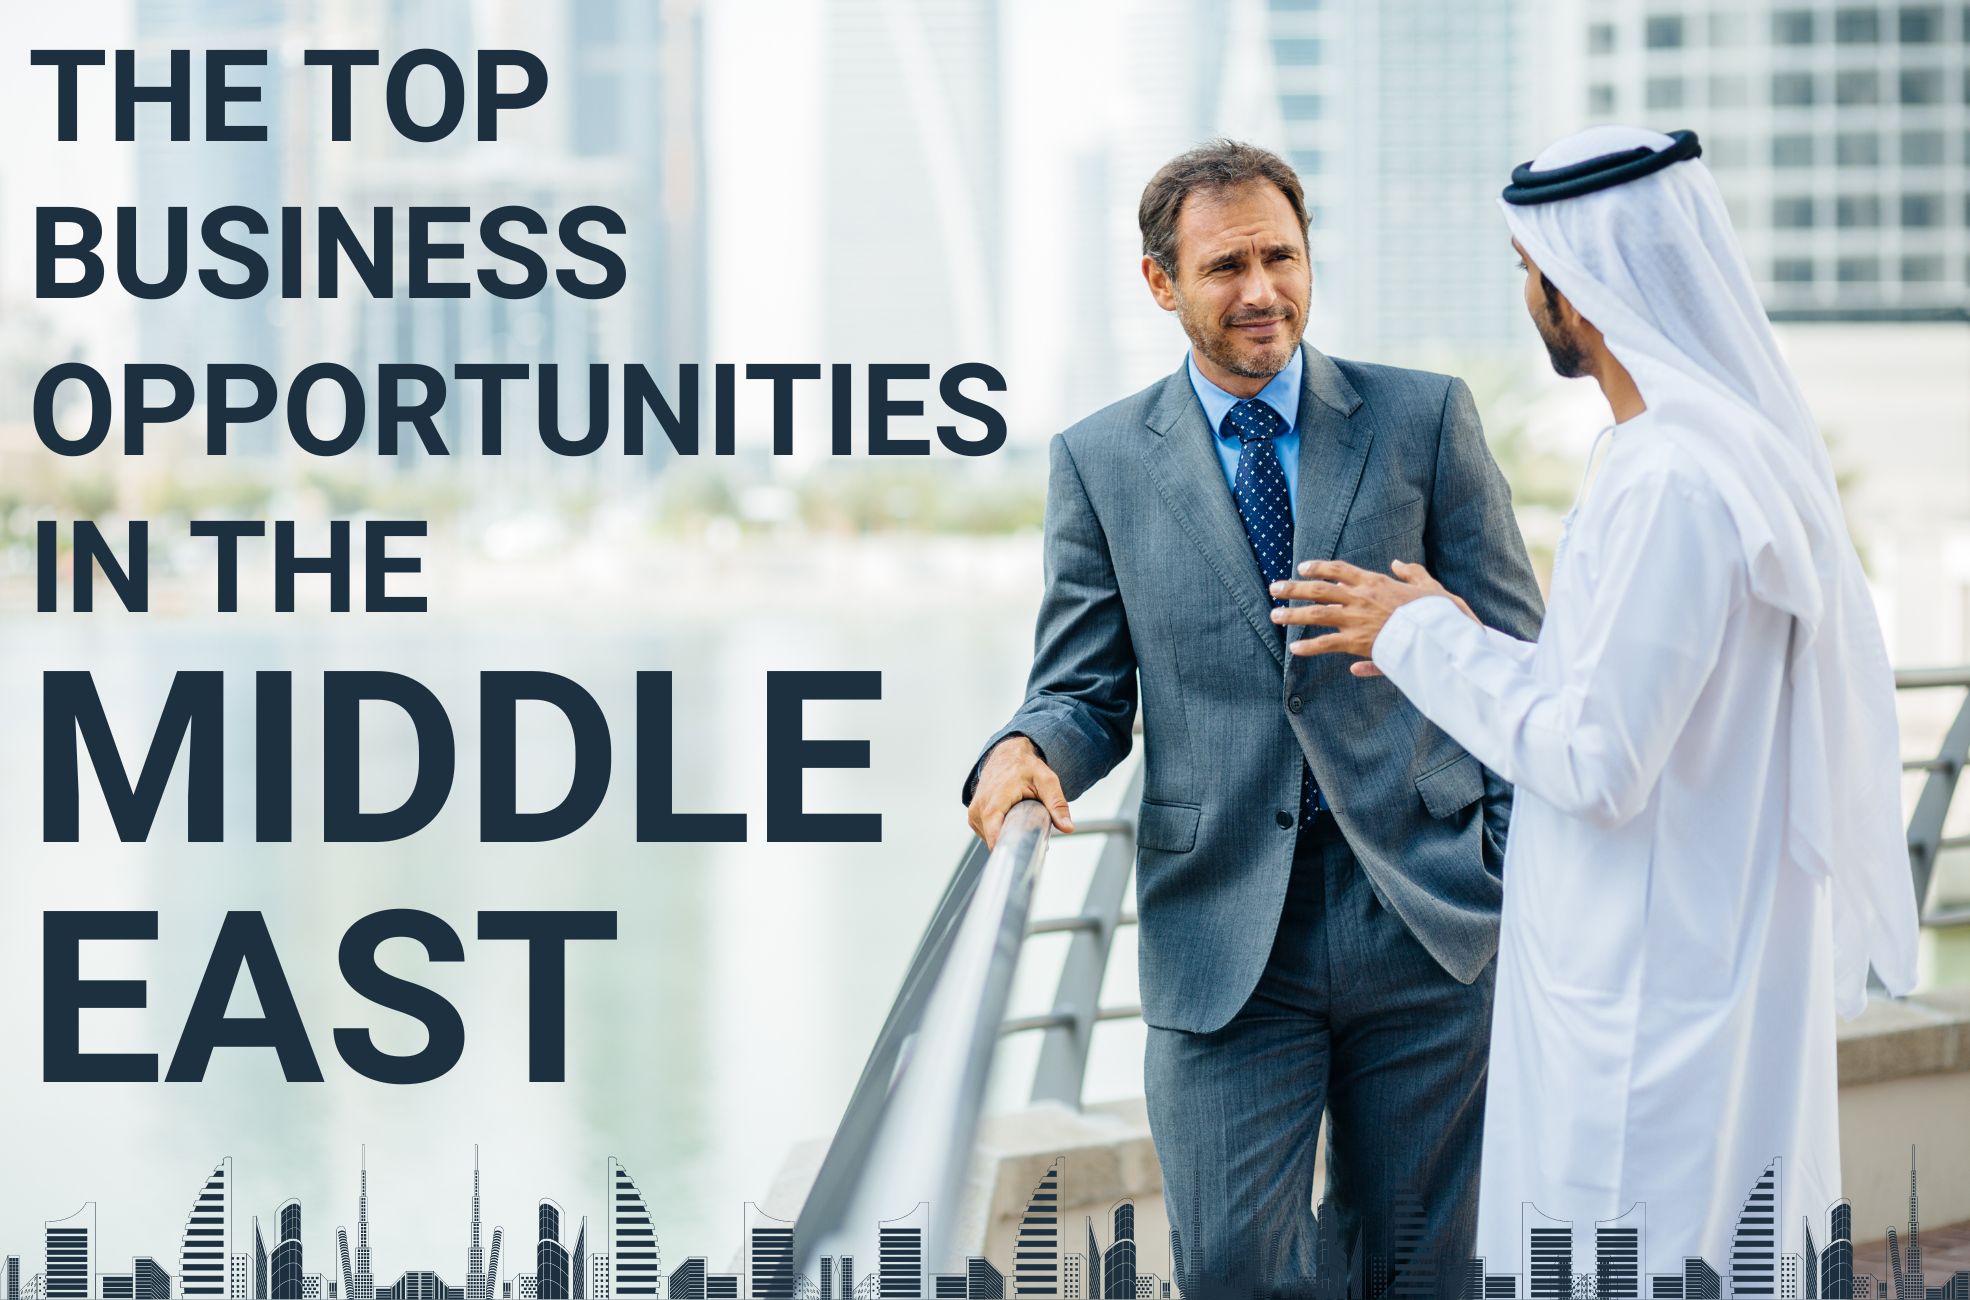 Cover Photo. Businessmen And Words "The Top Business Opportunities In The Middle East"